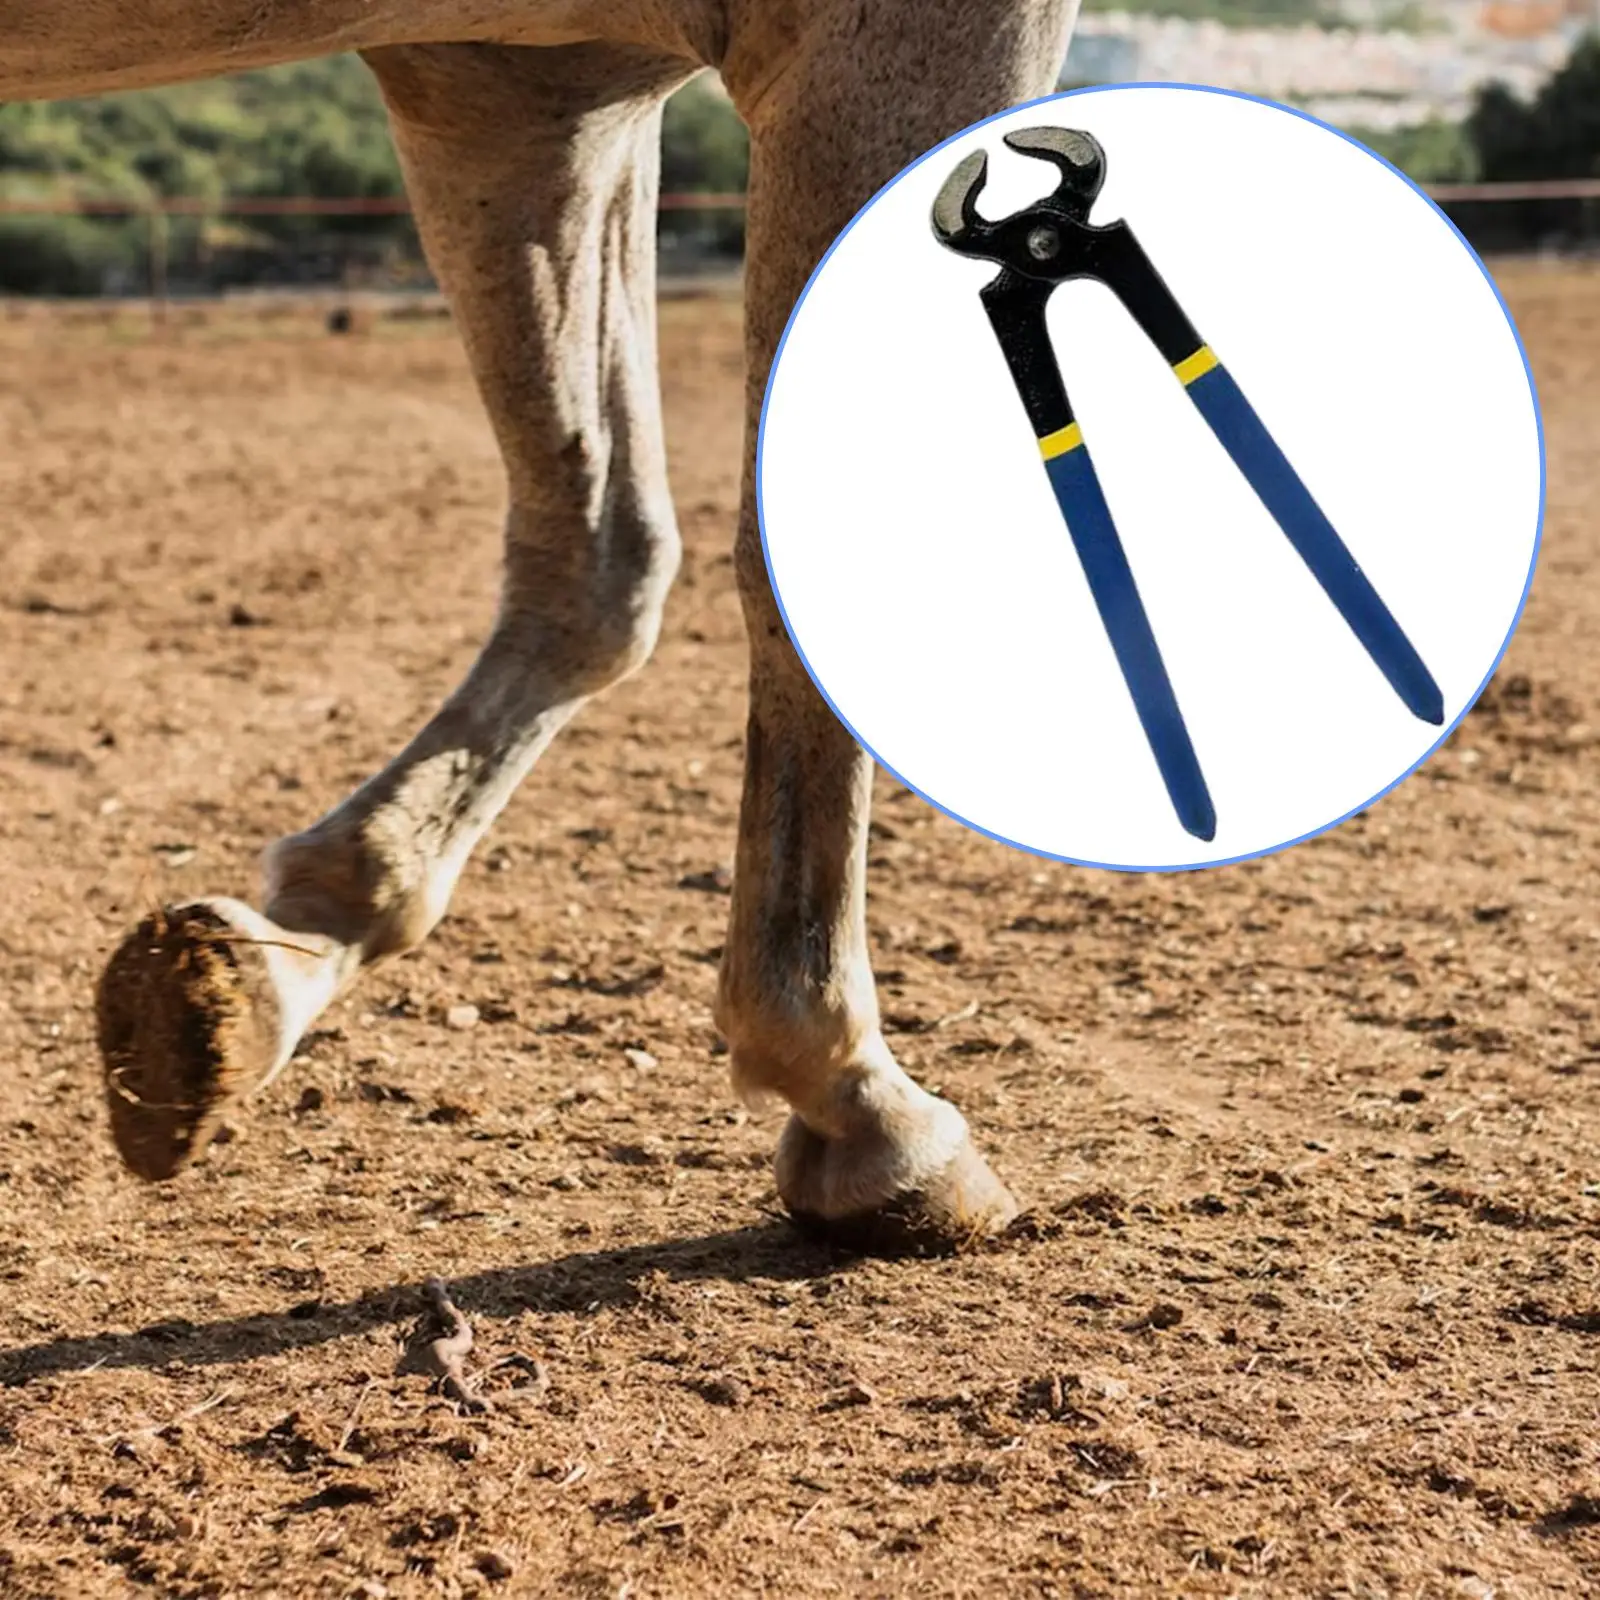 Horse Hoof Trimmer Horse Farrier Tool Metal Structure Goat Hoof Trimming Shear Hoof Nippers for Goats Sheep Cattle